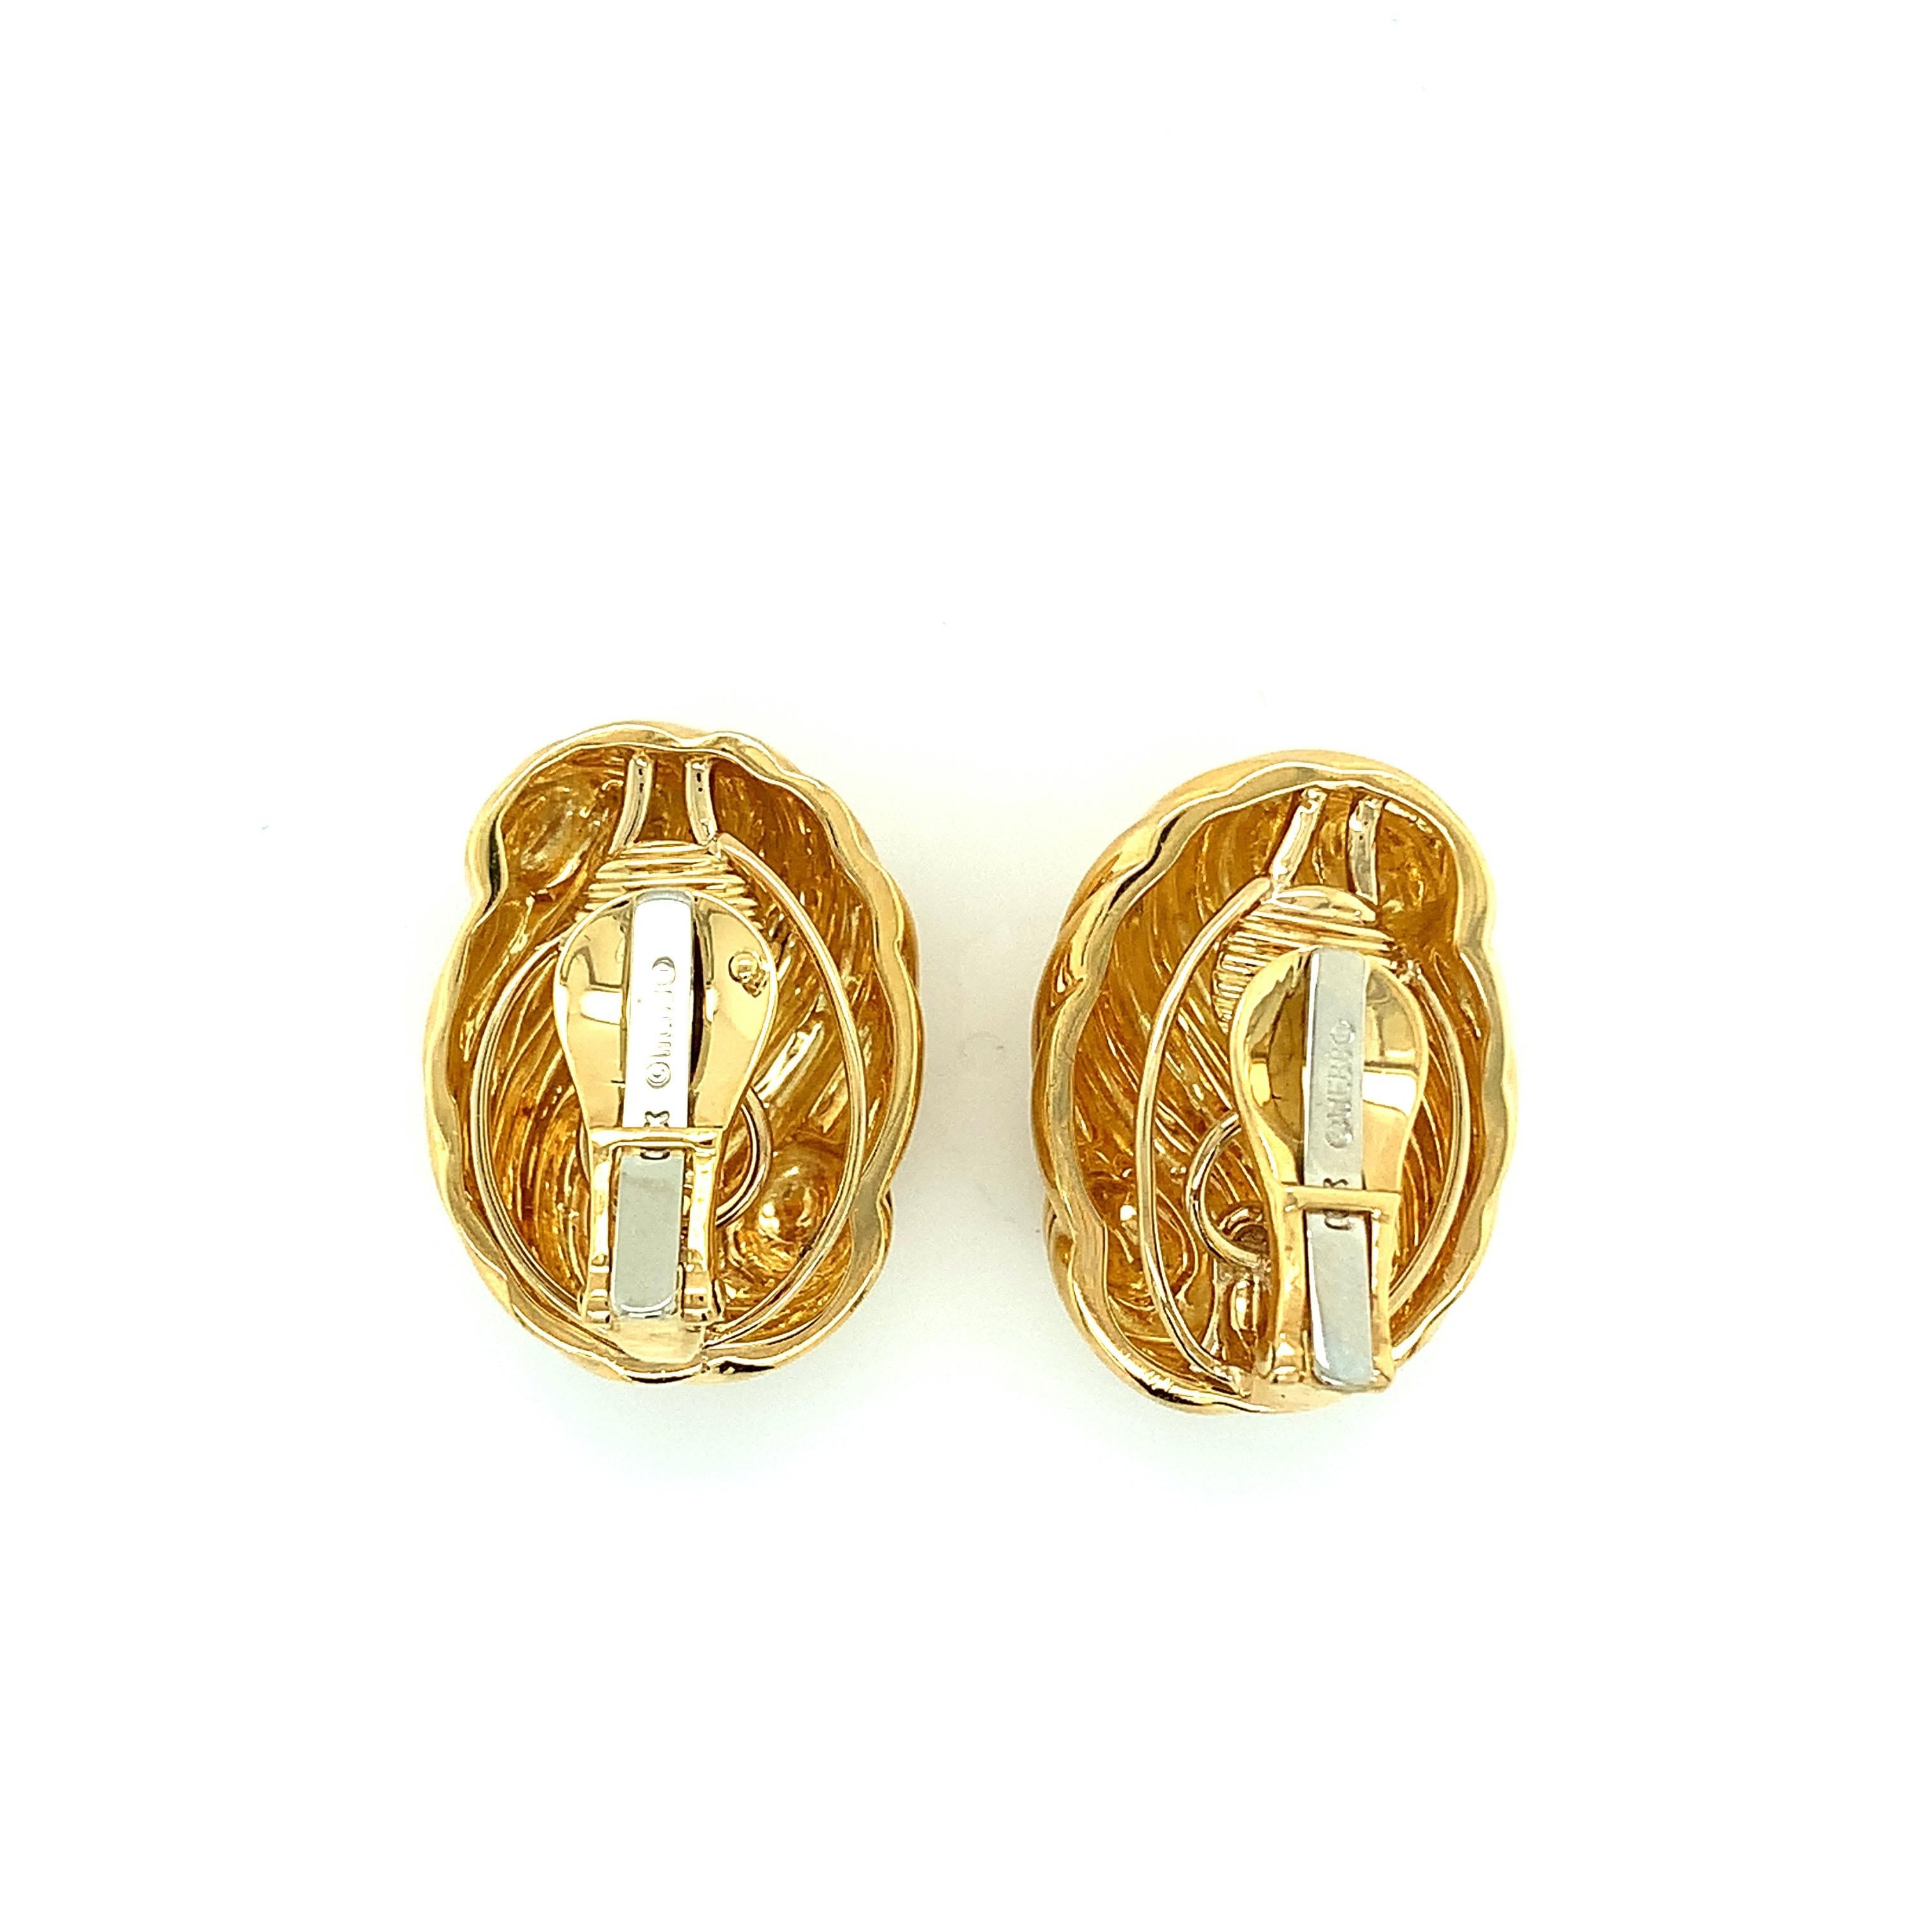 David Webb 18 karat yellow gold ear clips with a swirl design. Circa 1970s. Marked: 18K / Webb. Total weight: 26.5 grams. Width: 0.75 inch. Length: 1 inch. 